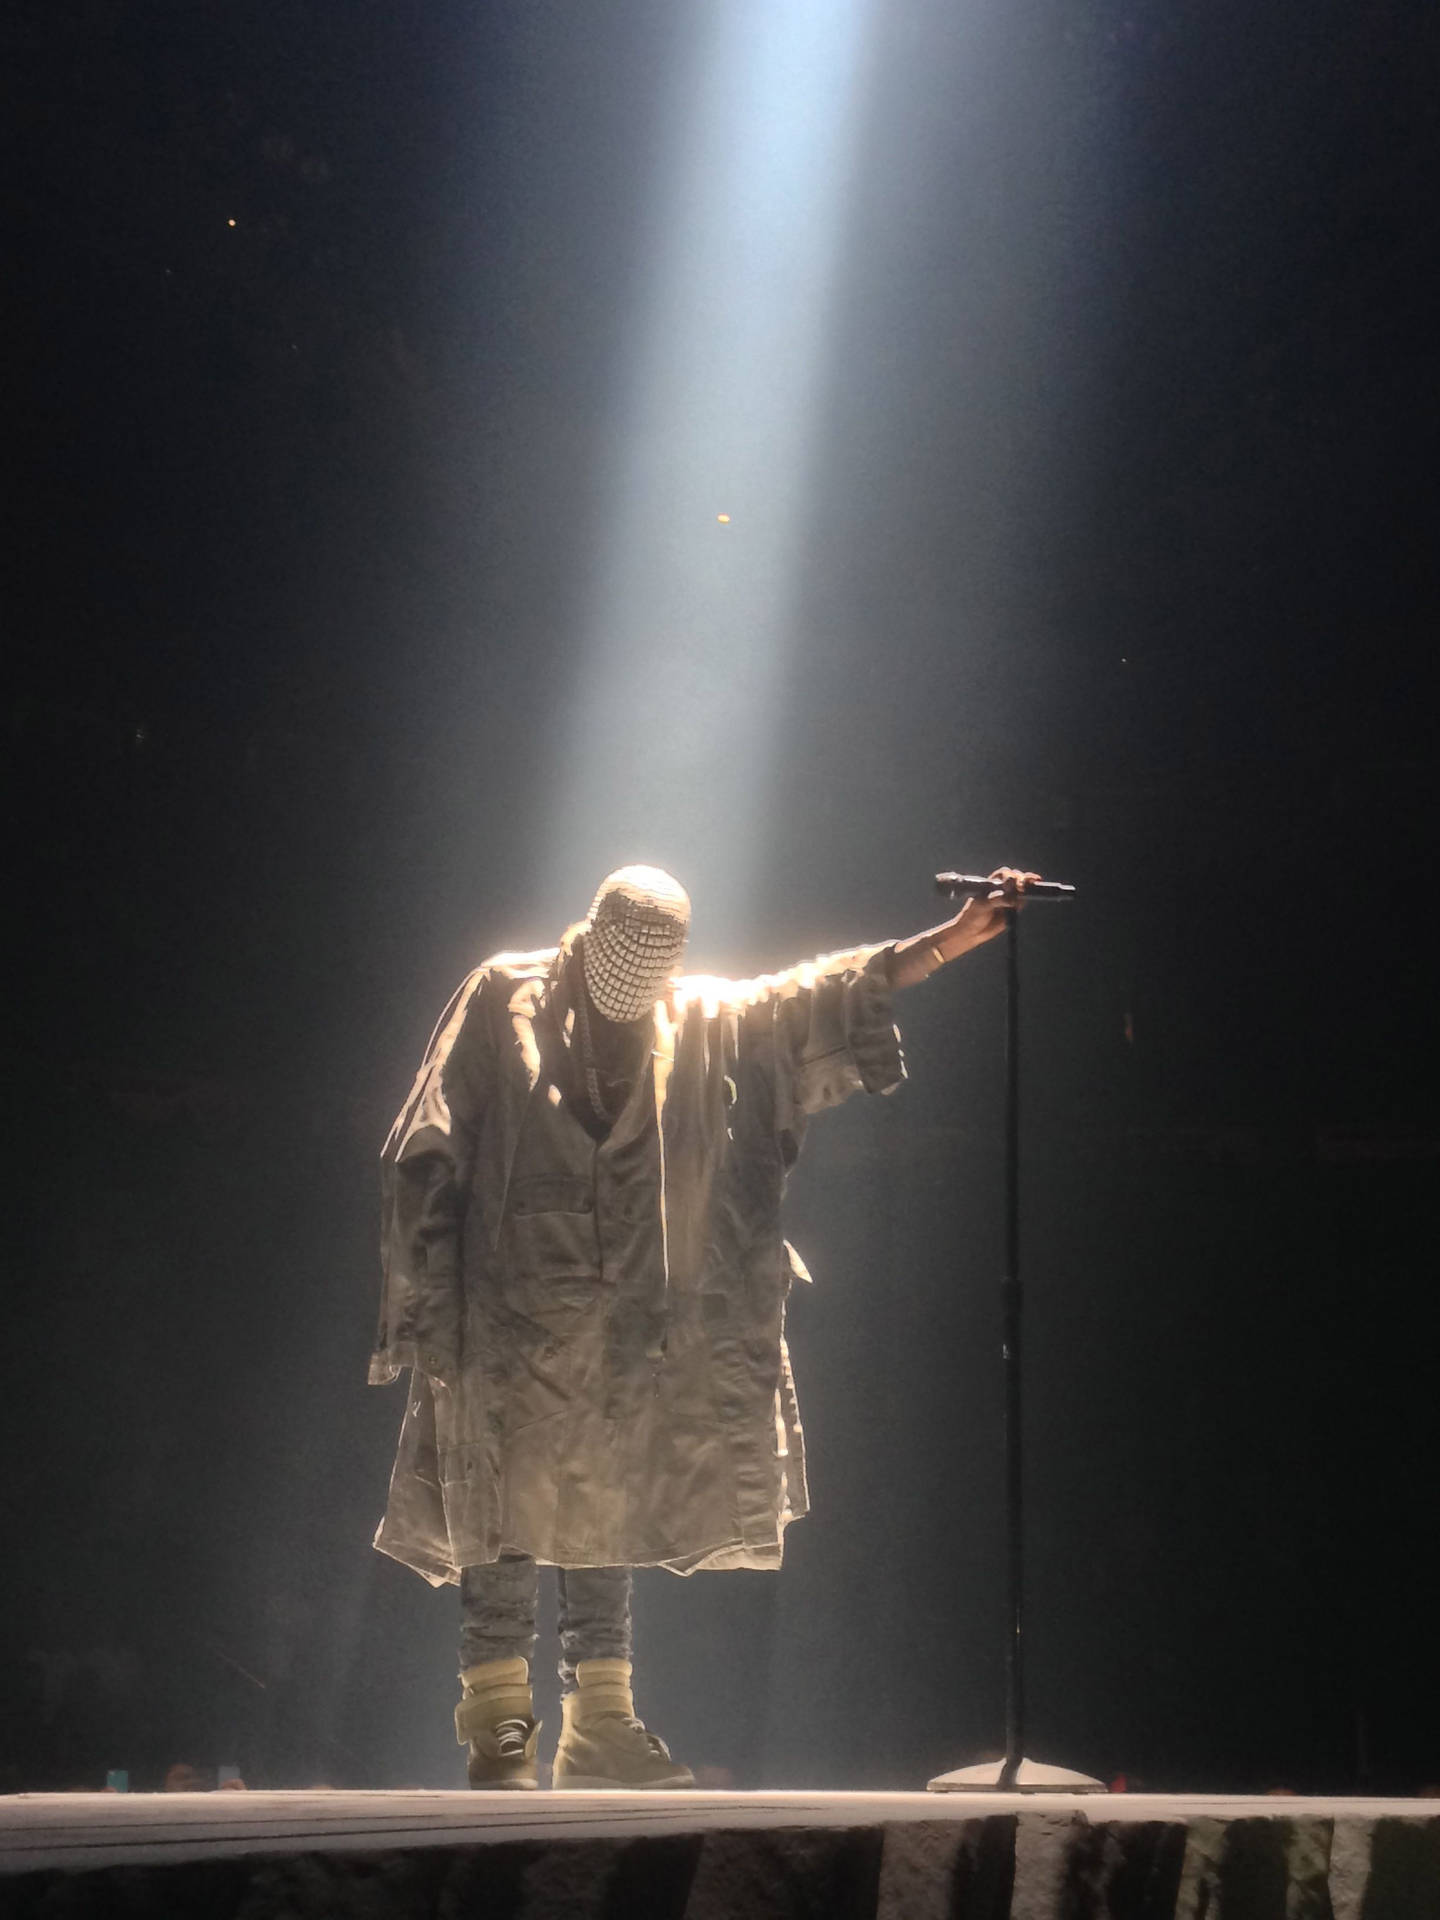 Kanye West Ye With The Sun In The Background Wallpaper